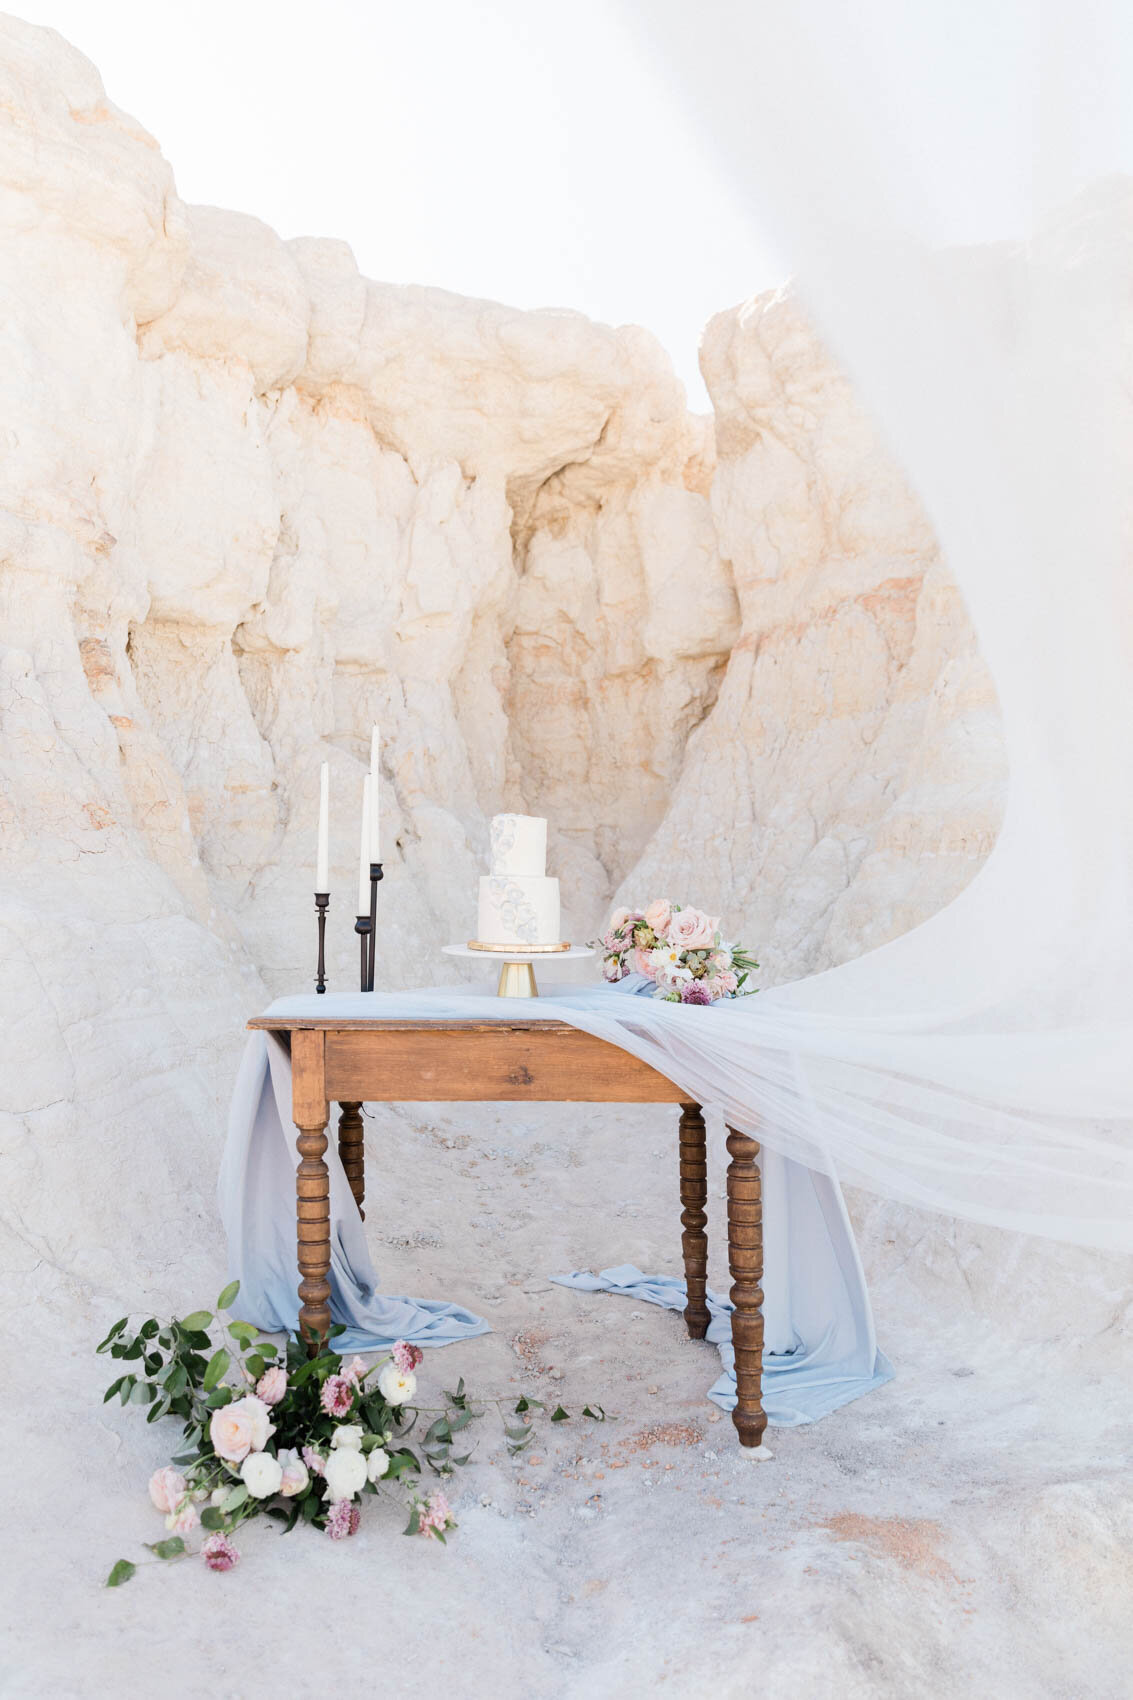 ethereal_editorial_at_the_Paint_mines_for_rocky_mountain_bride_by_colorado_wedding_photographer_diana_coulter-3